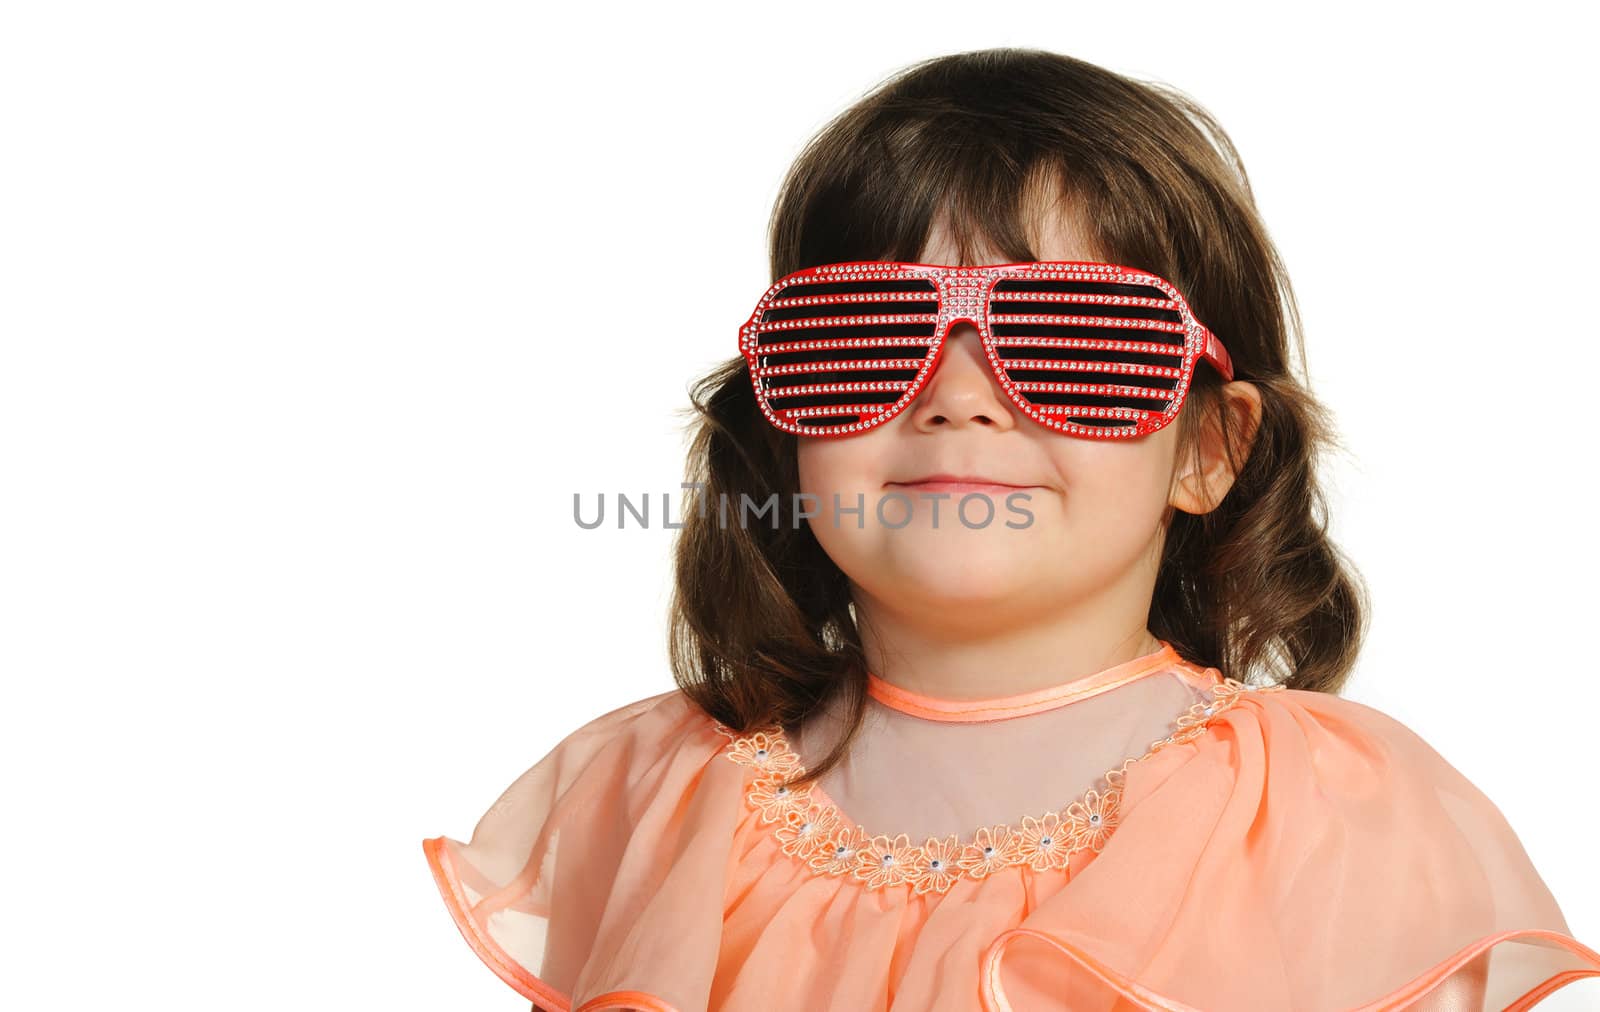 Pretty the little girl in abstract sun glasses. It is isolated on a white background